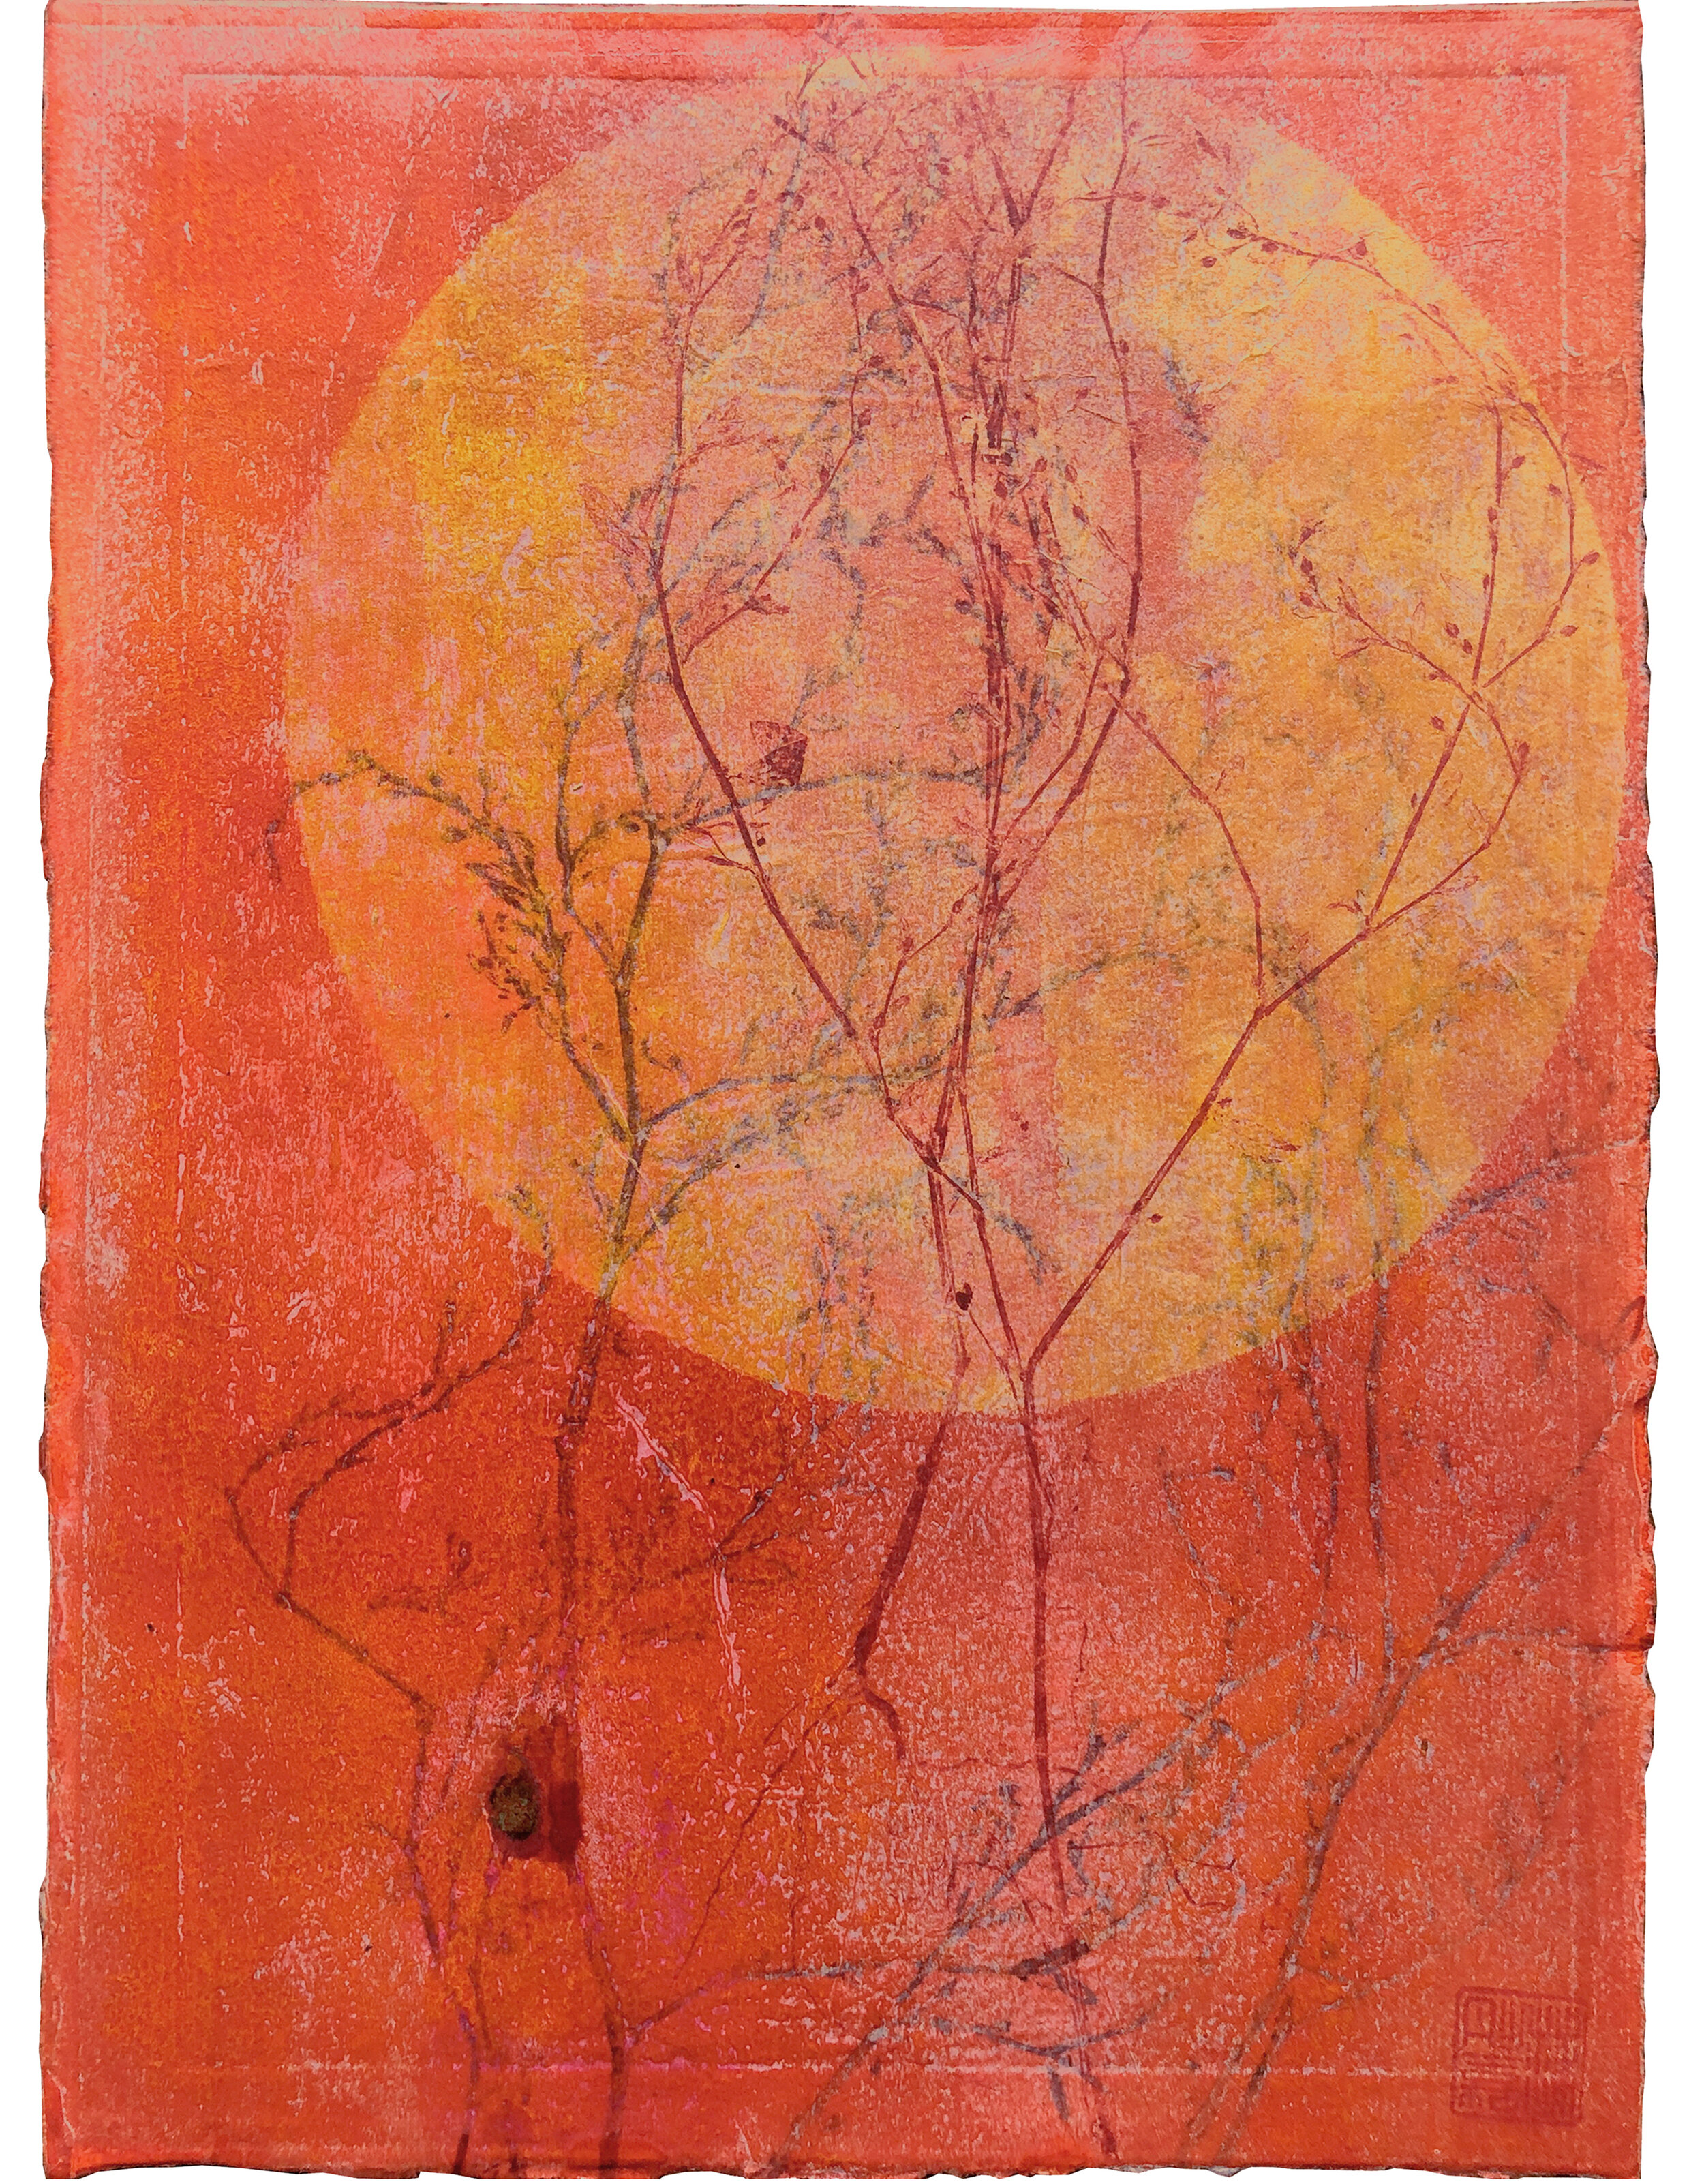 Monotype and mixed media #3 - 2020